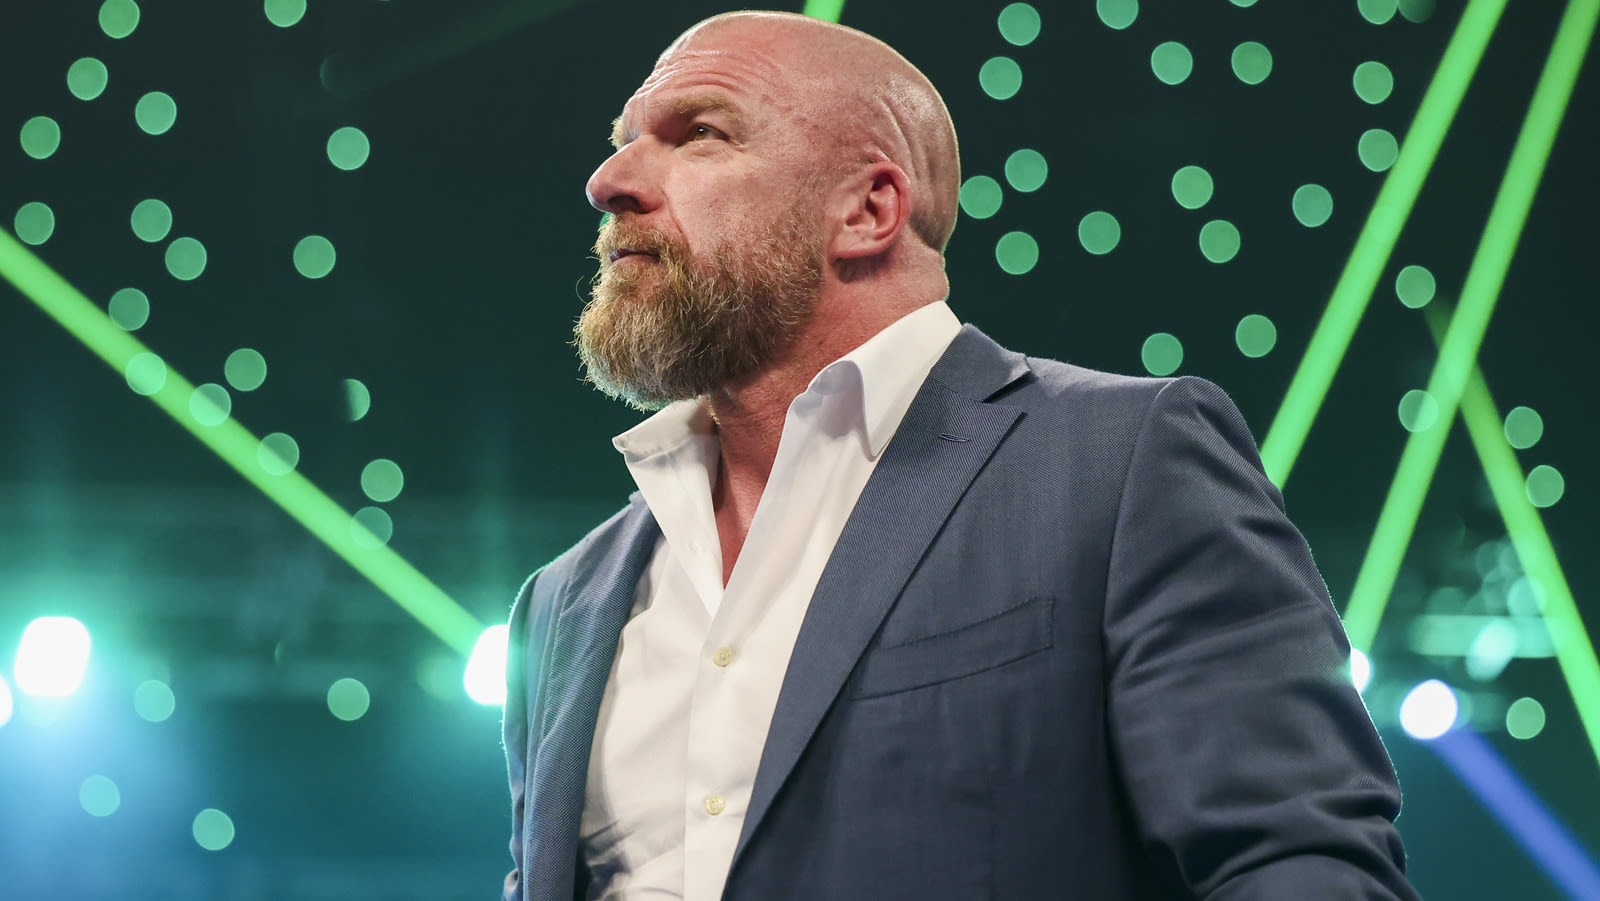 AEW's Kenny Omega Weighs In On WWE's Triple H As A Booker And A Wrestler - Wrestling Inc.